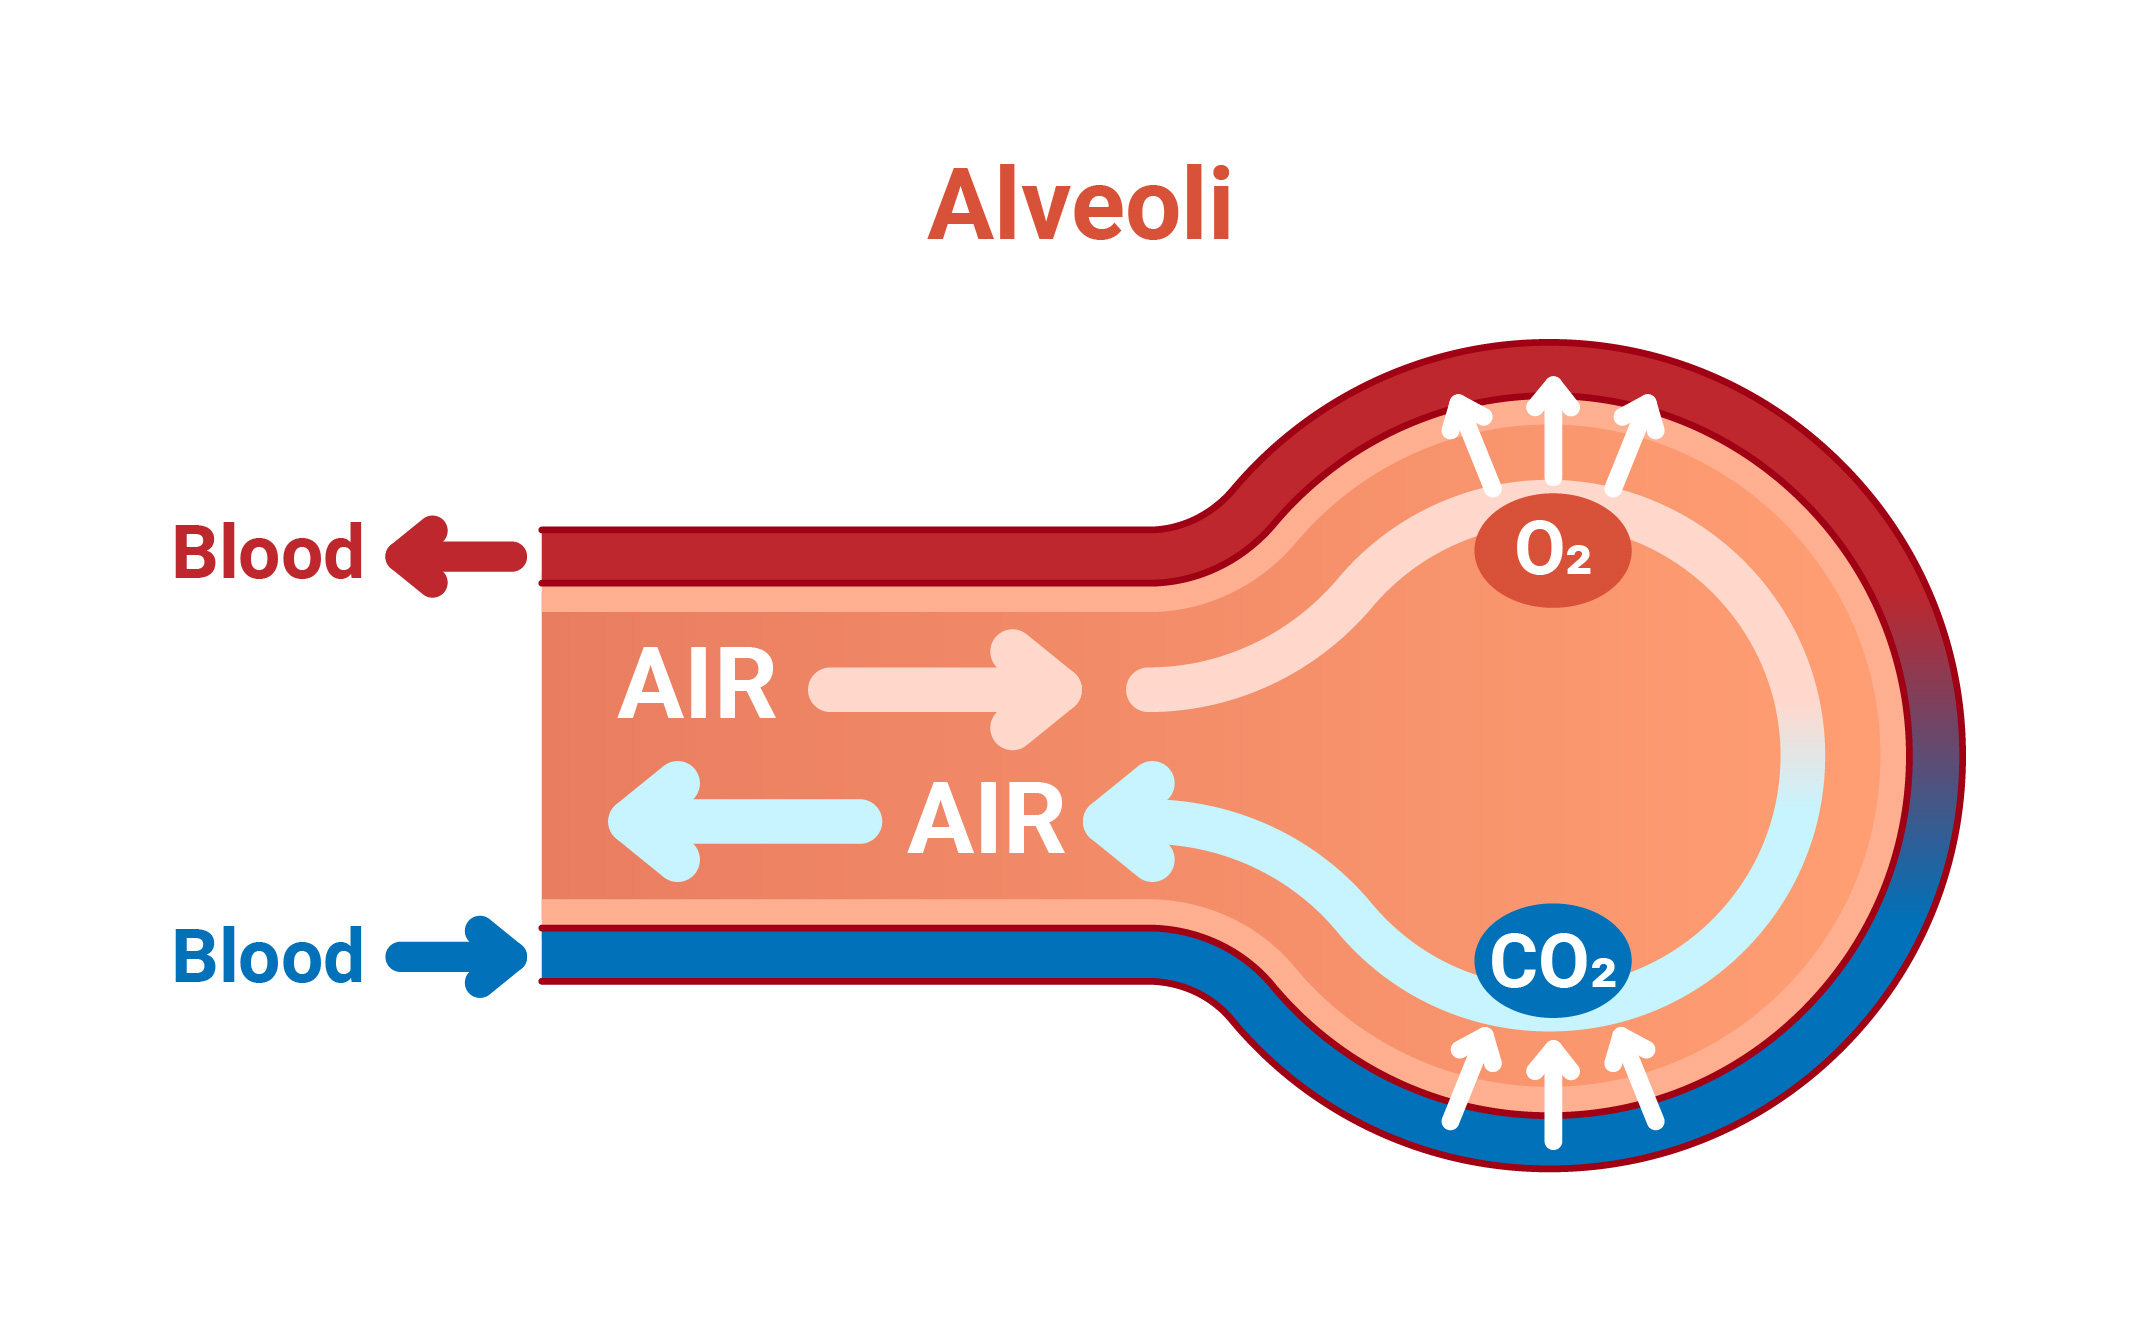 Graphical representation of the release of CO2 and uptake of O2 by the gas exchange of blood and air in the alveoli.